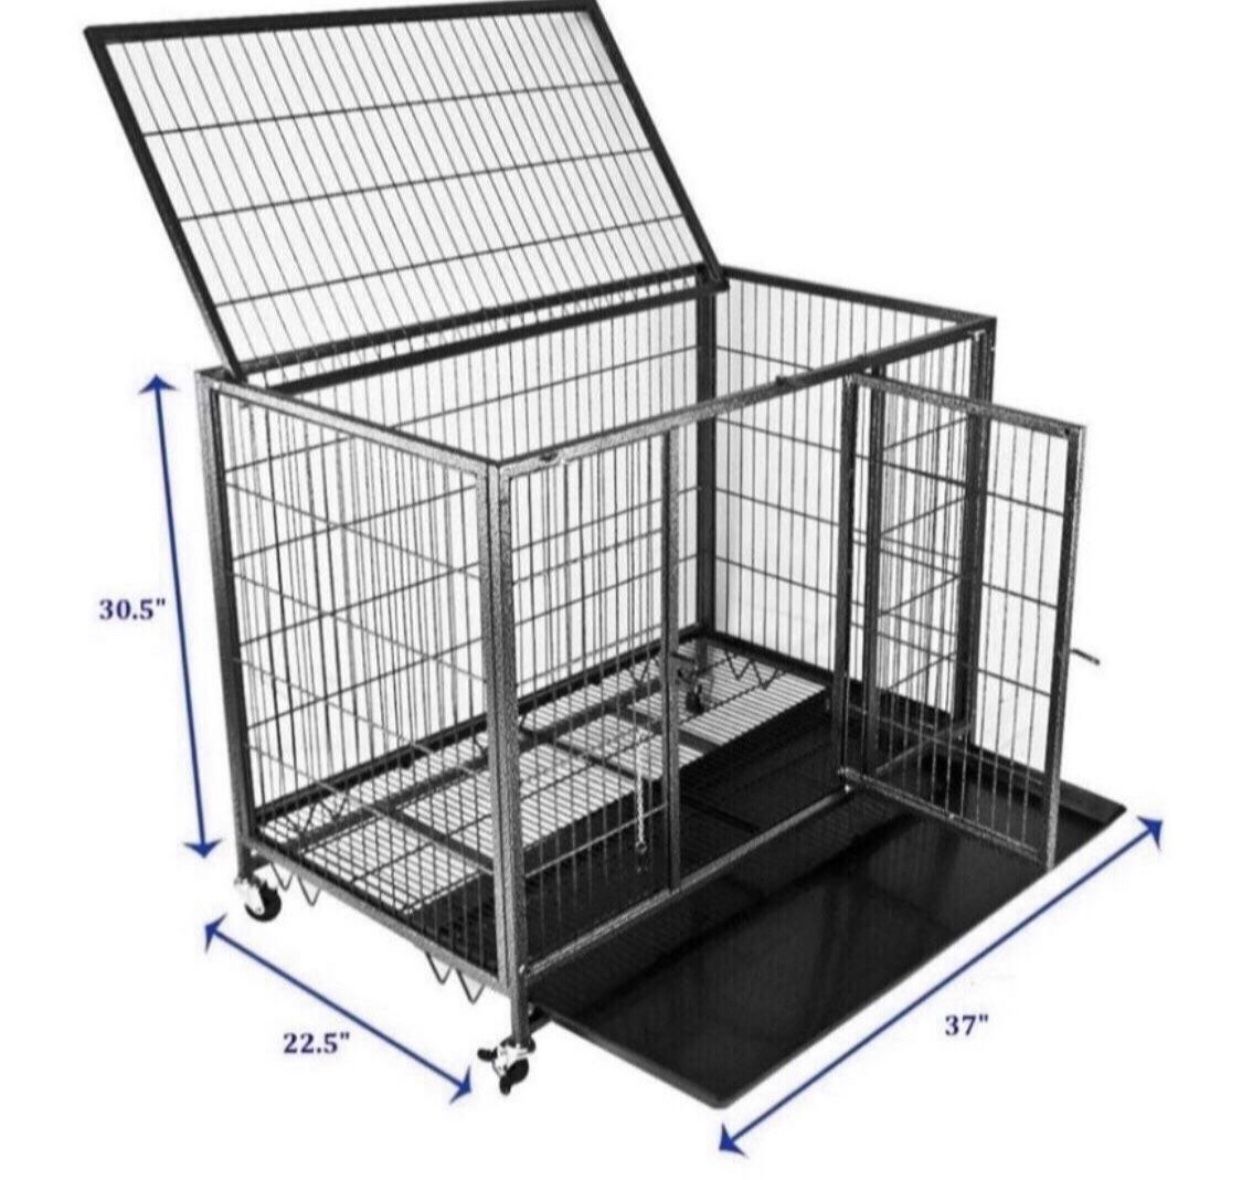 🔴 On sale 🔥Double Set Brandnew 37” Heavy Duty Dog Kennel Crate Cage 🐶 please see dimensions in second picture 🇺🇸 